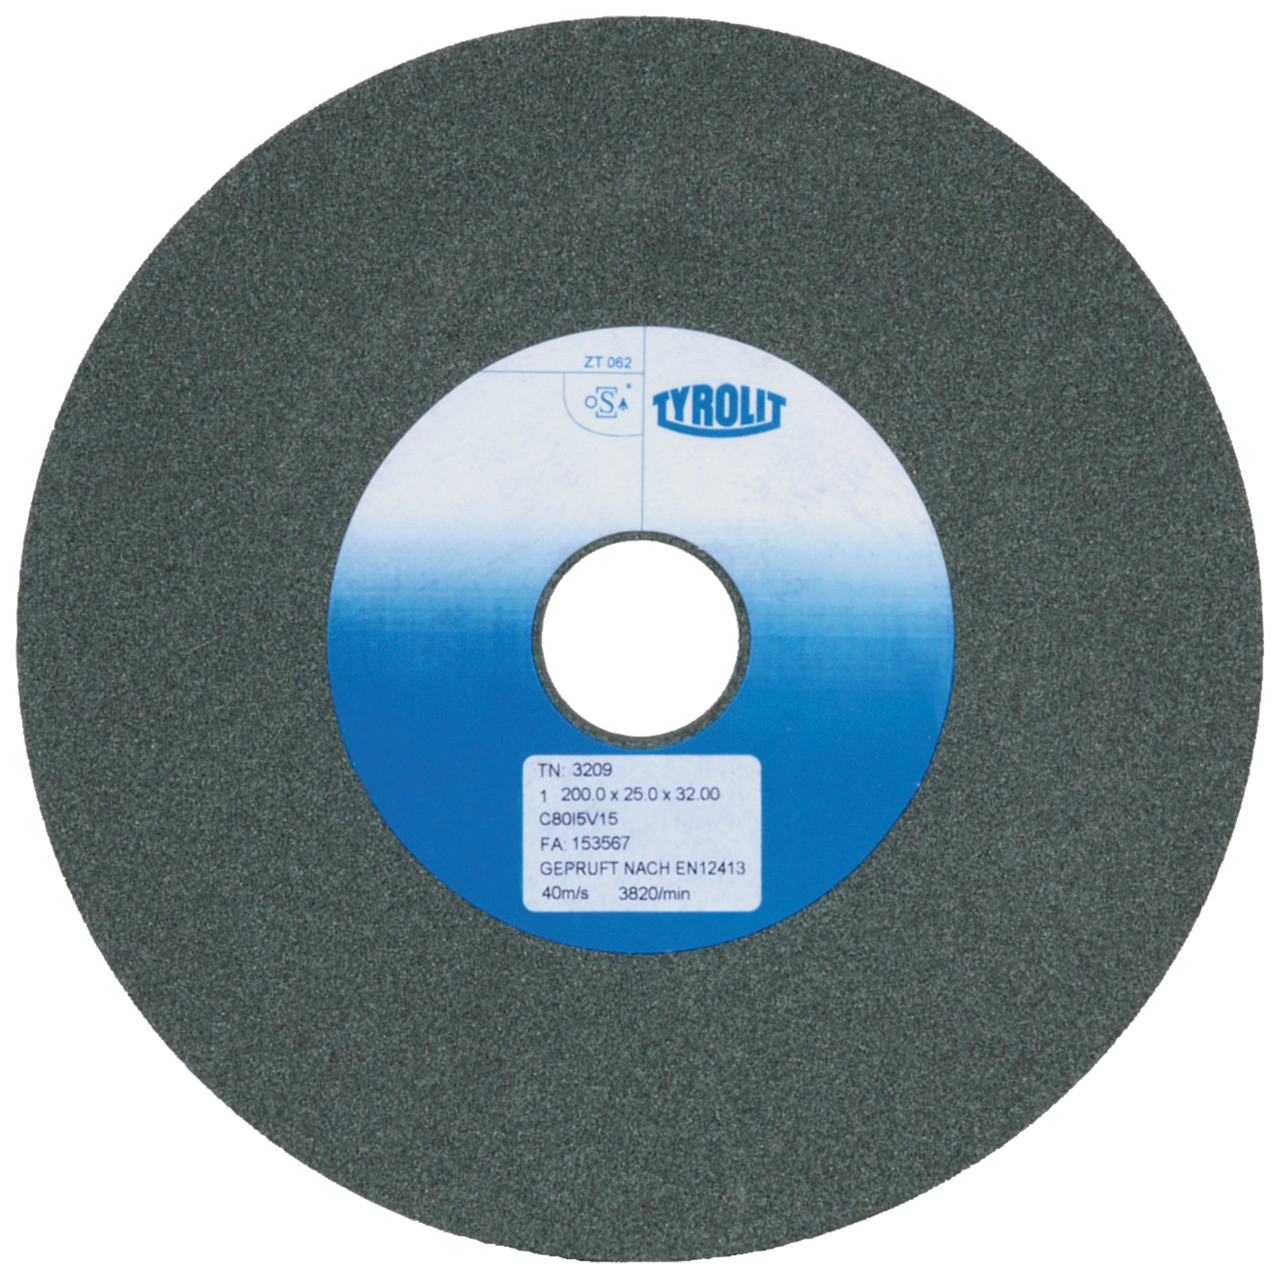 Tyrolit Conventional ceramic grinding discs DxDxH 150x20x32 For carbide and cast iron, shape: 1, Art. 861009